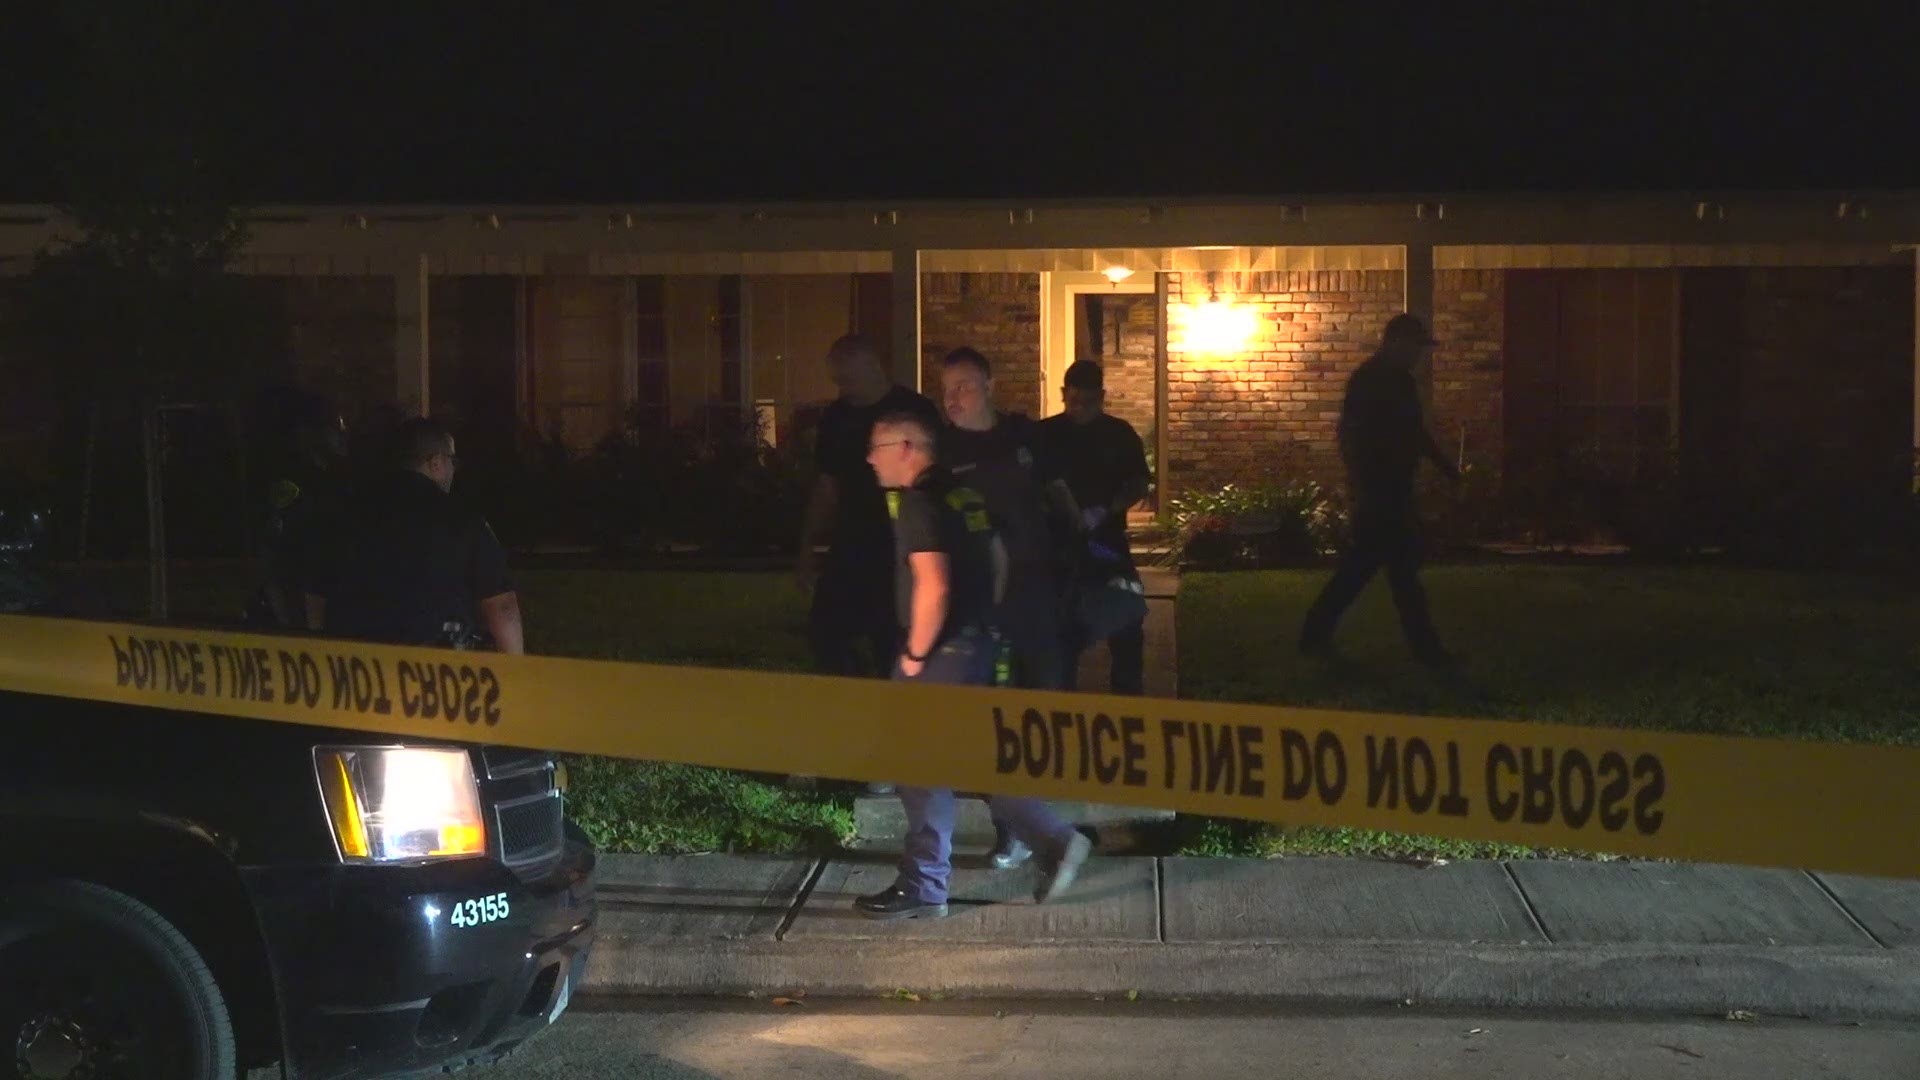 Houston homicide detectives said a husband and wife shot and killed a man who broke into their home. They found the man in their backyard.